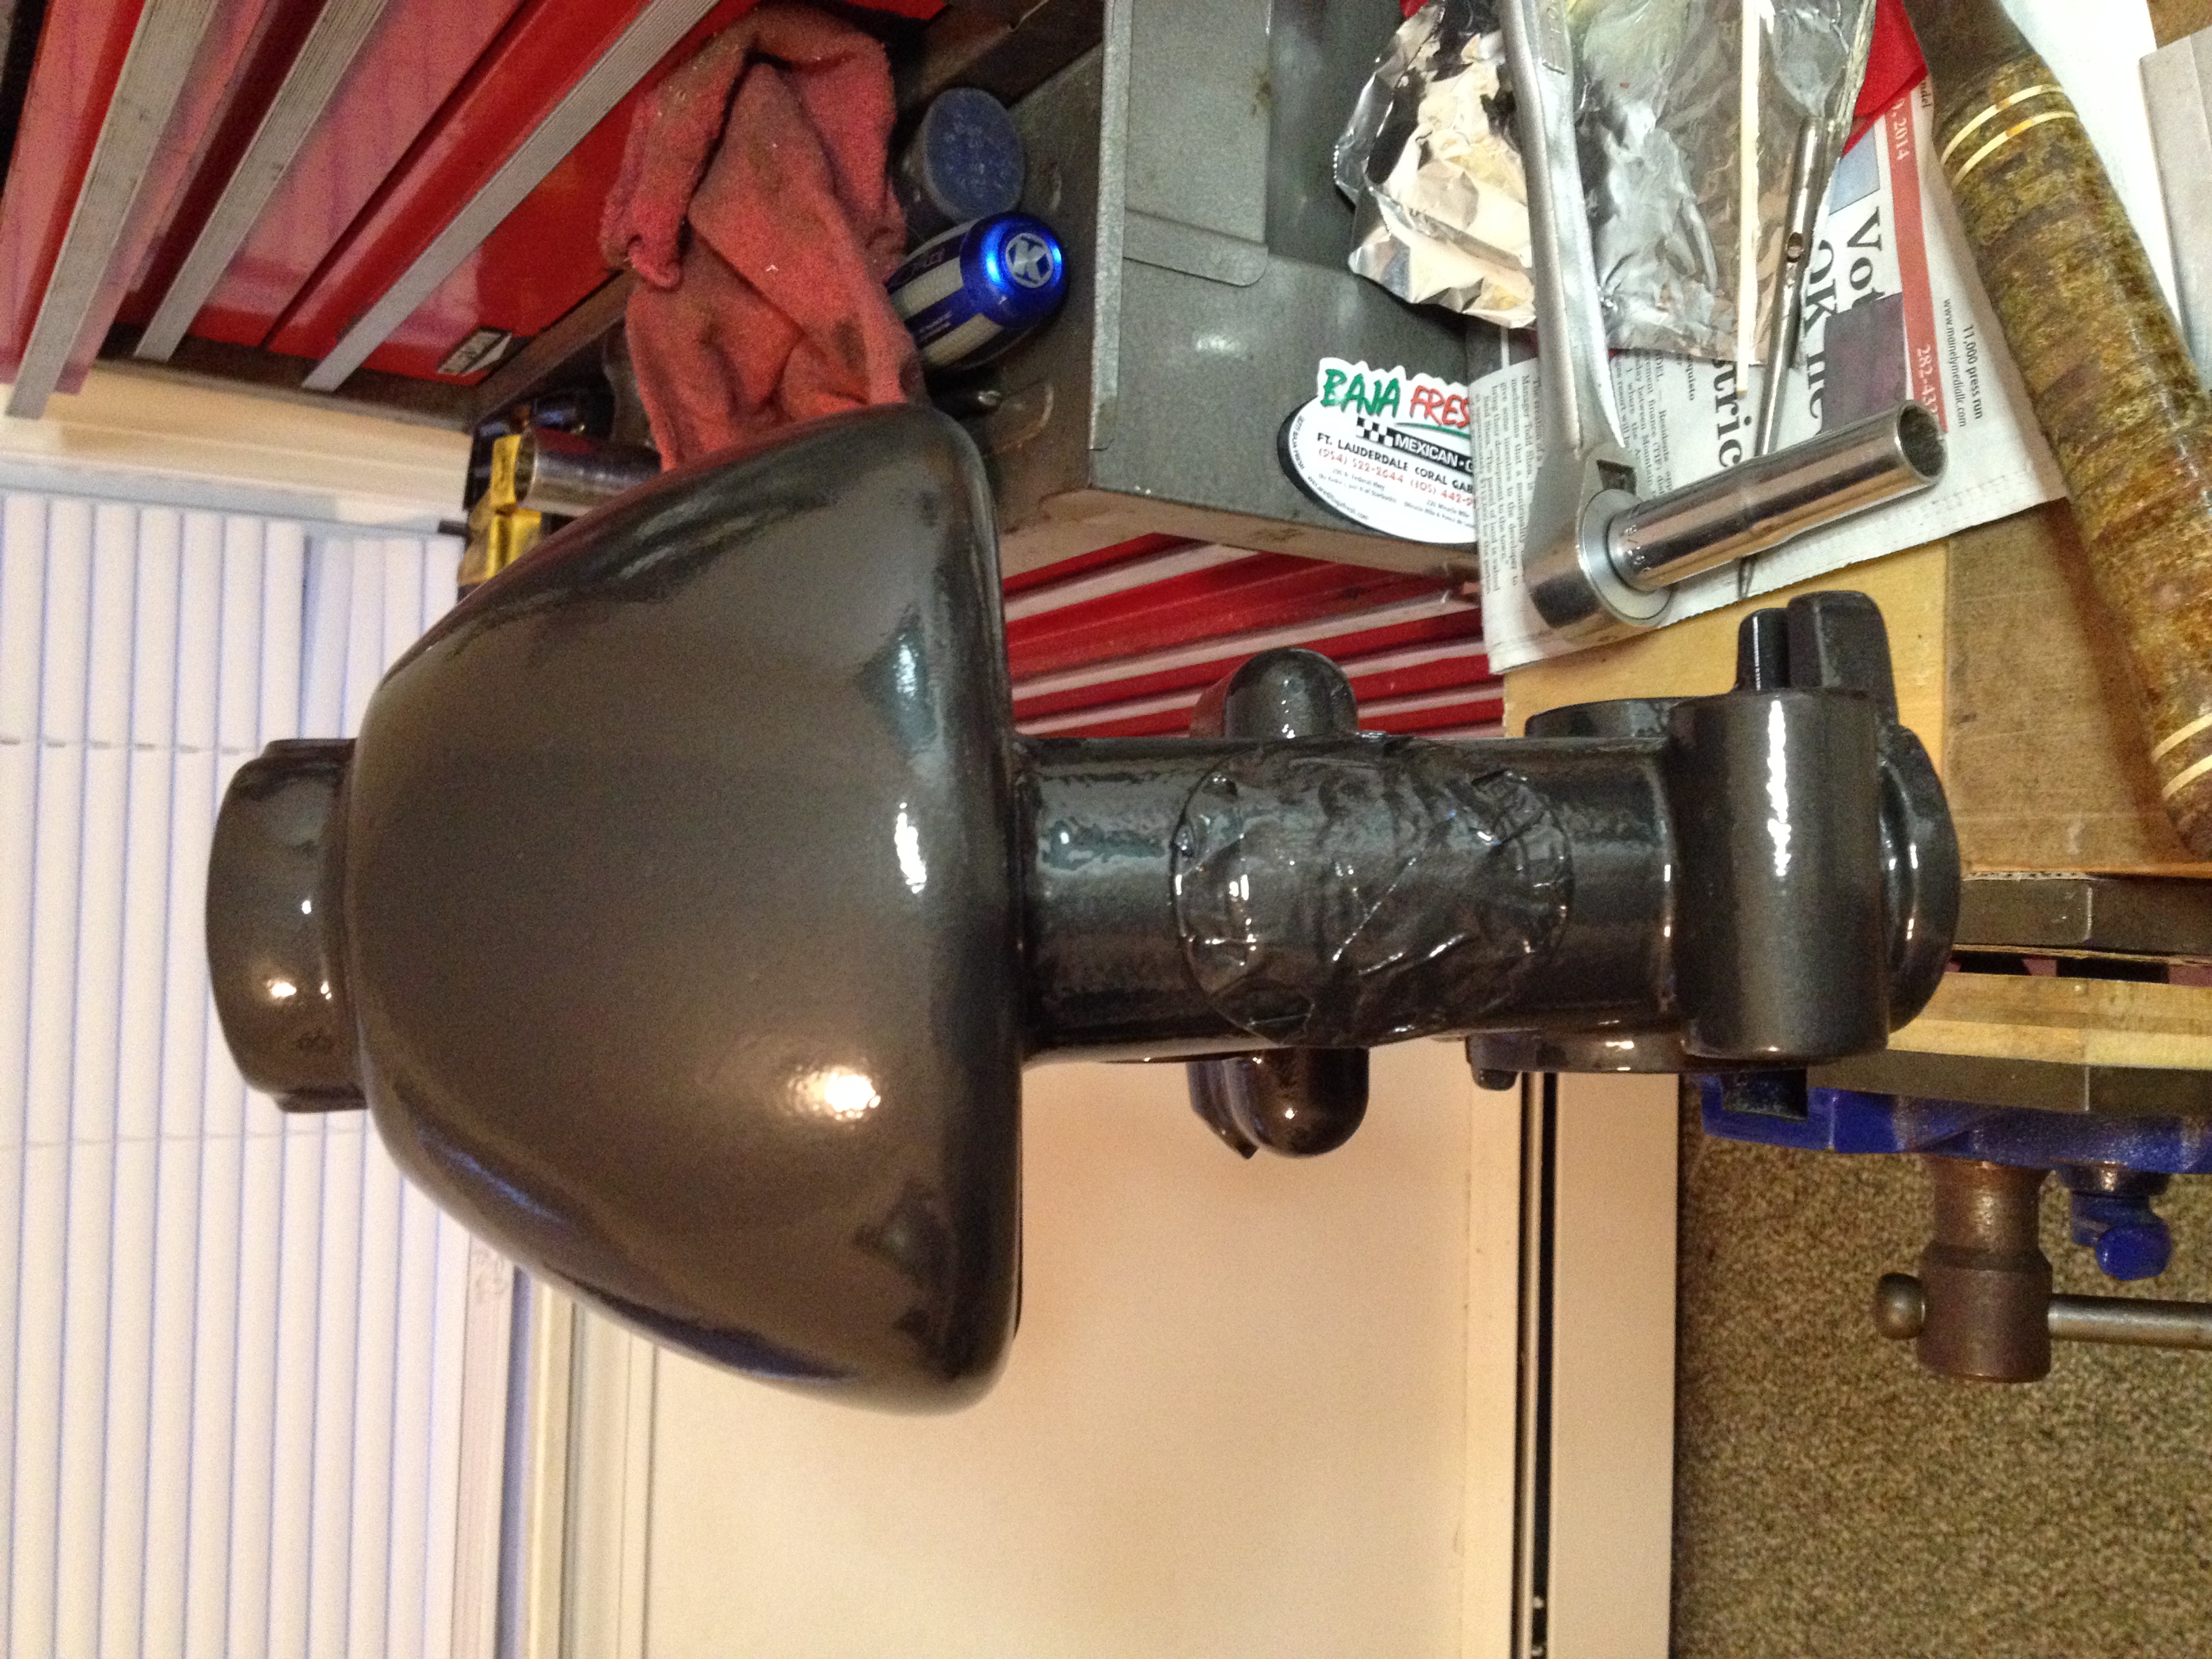  After a full paint stripping, the new Rustoleum hammered paint job in black....a modern twist on a classic machine. 